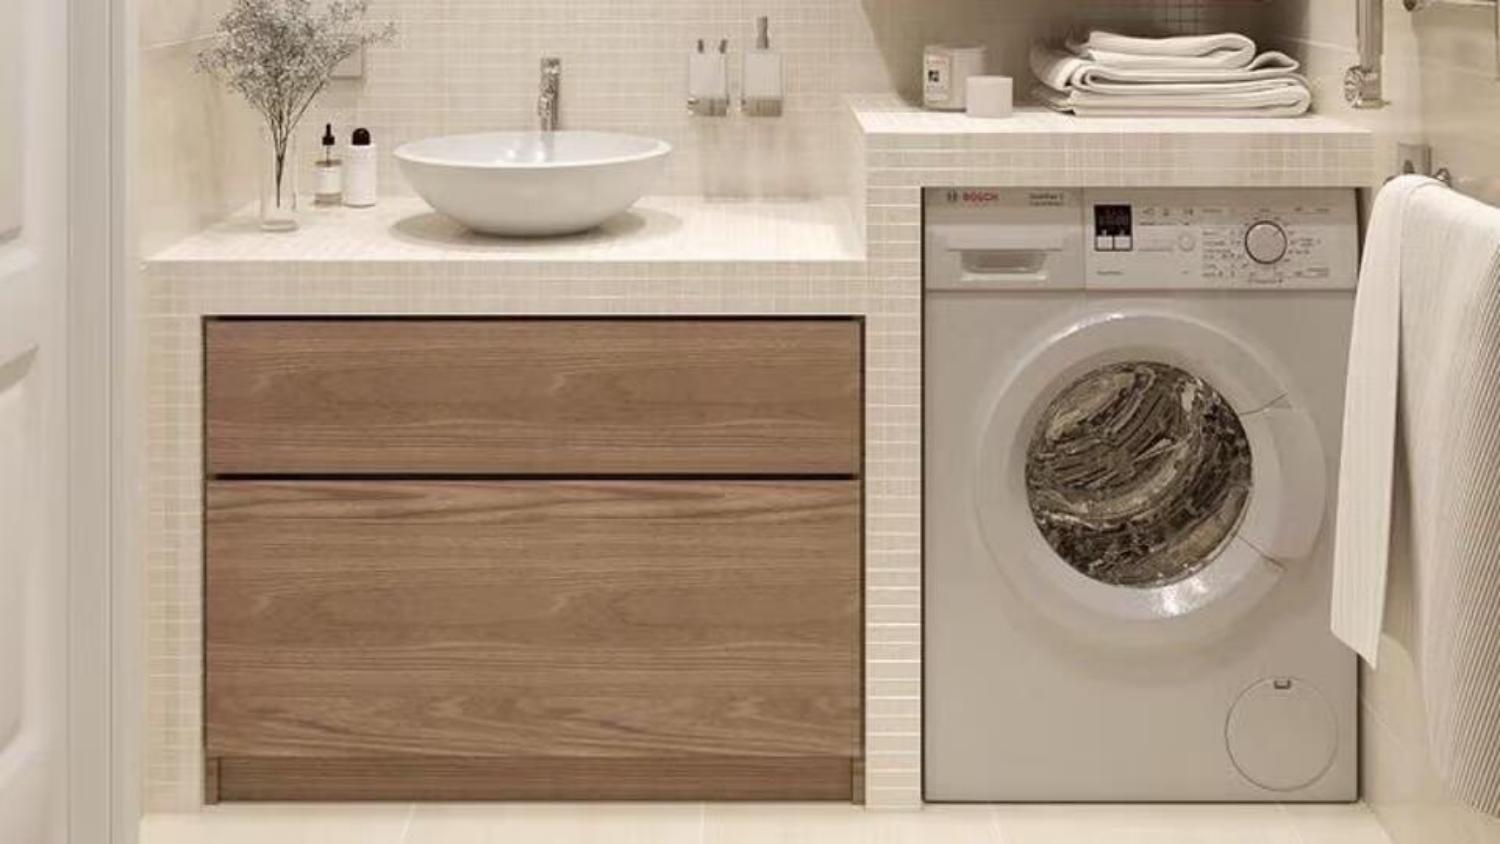 How to Install a Washing Machine in the Bathroom? - Blog - 2